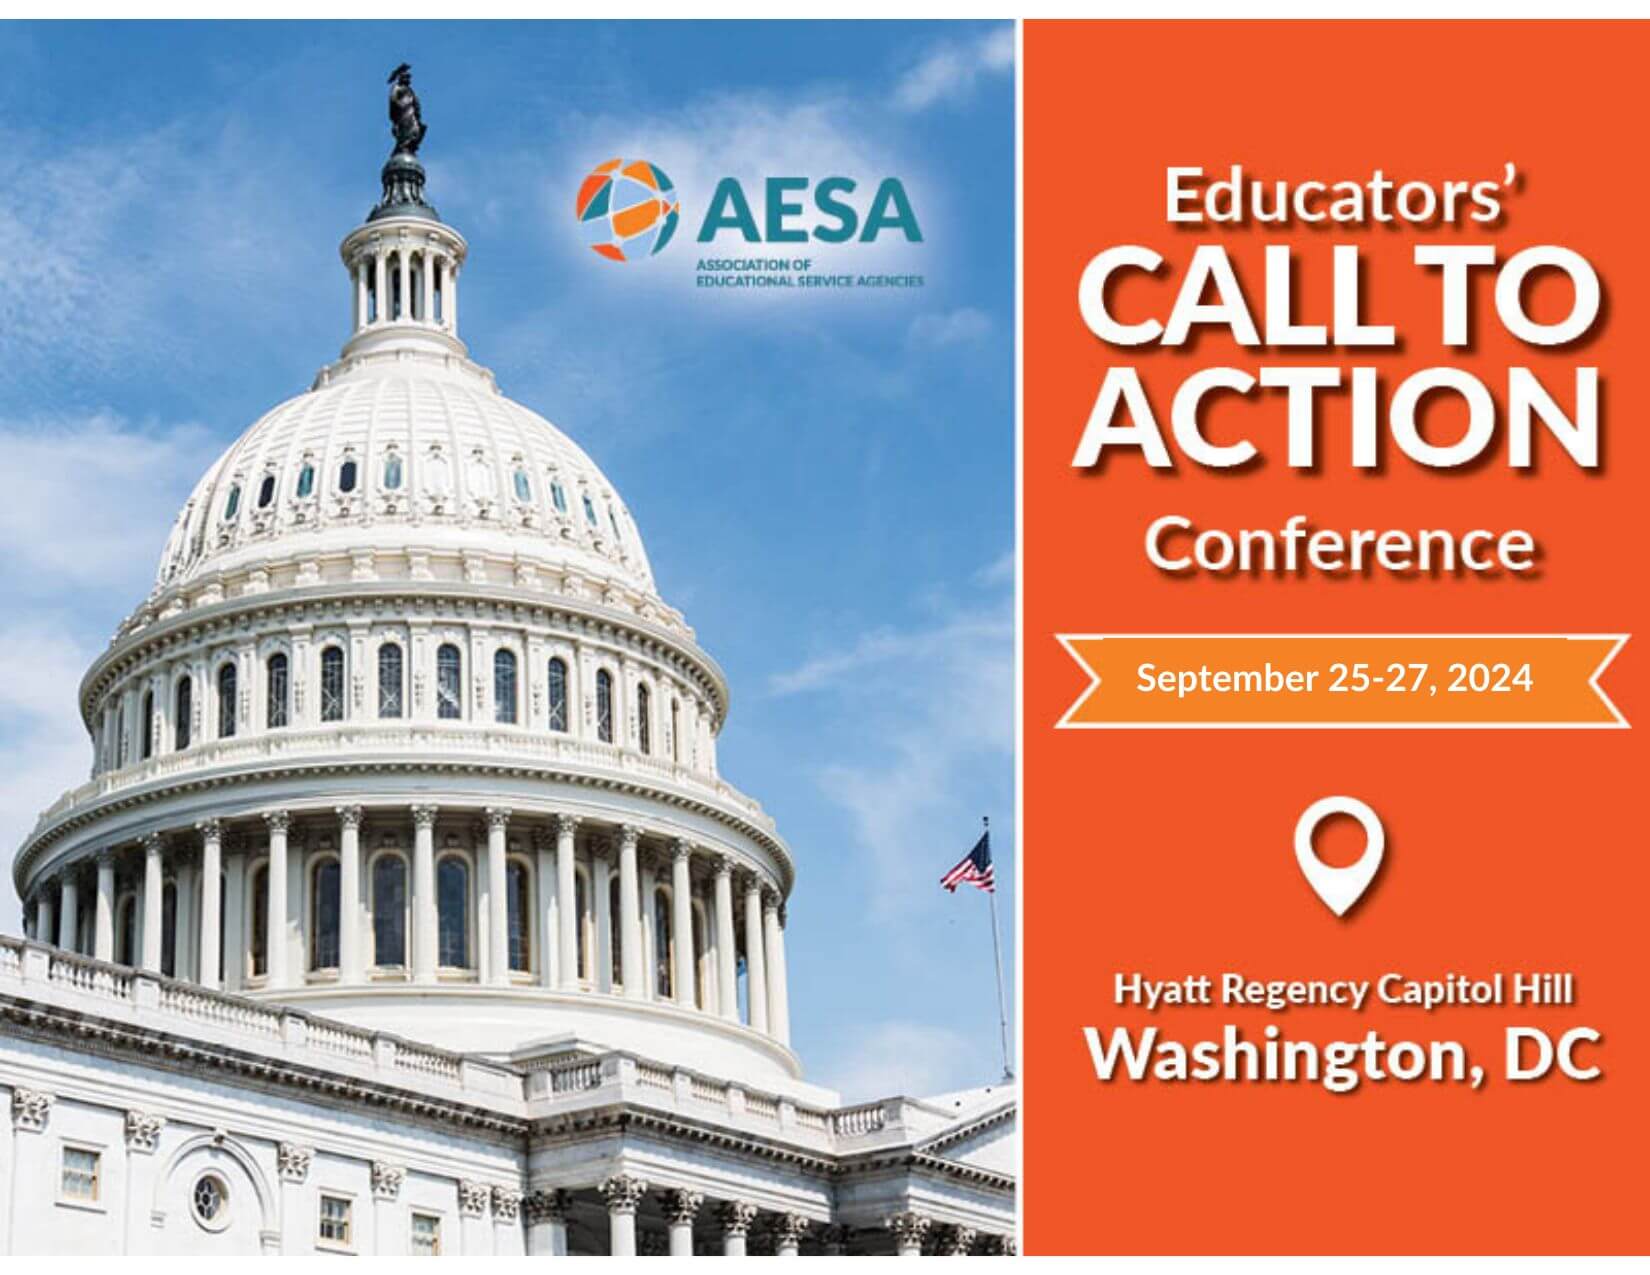 Educators' Call to Action Conference Association of Educational